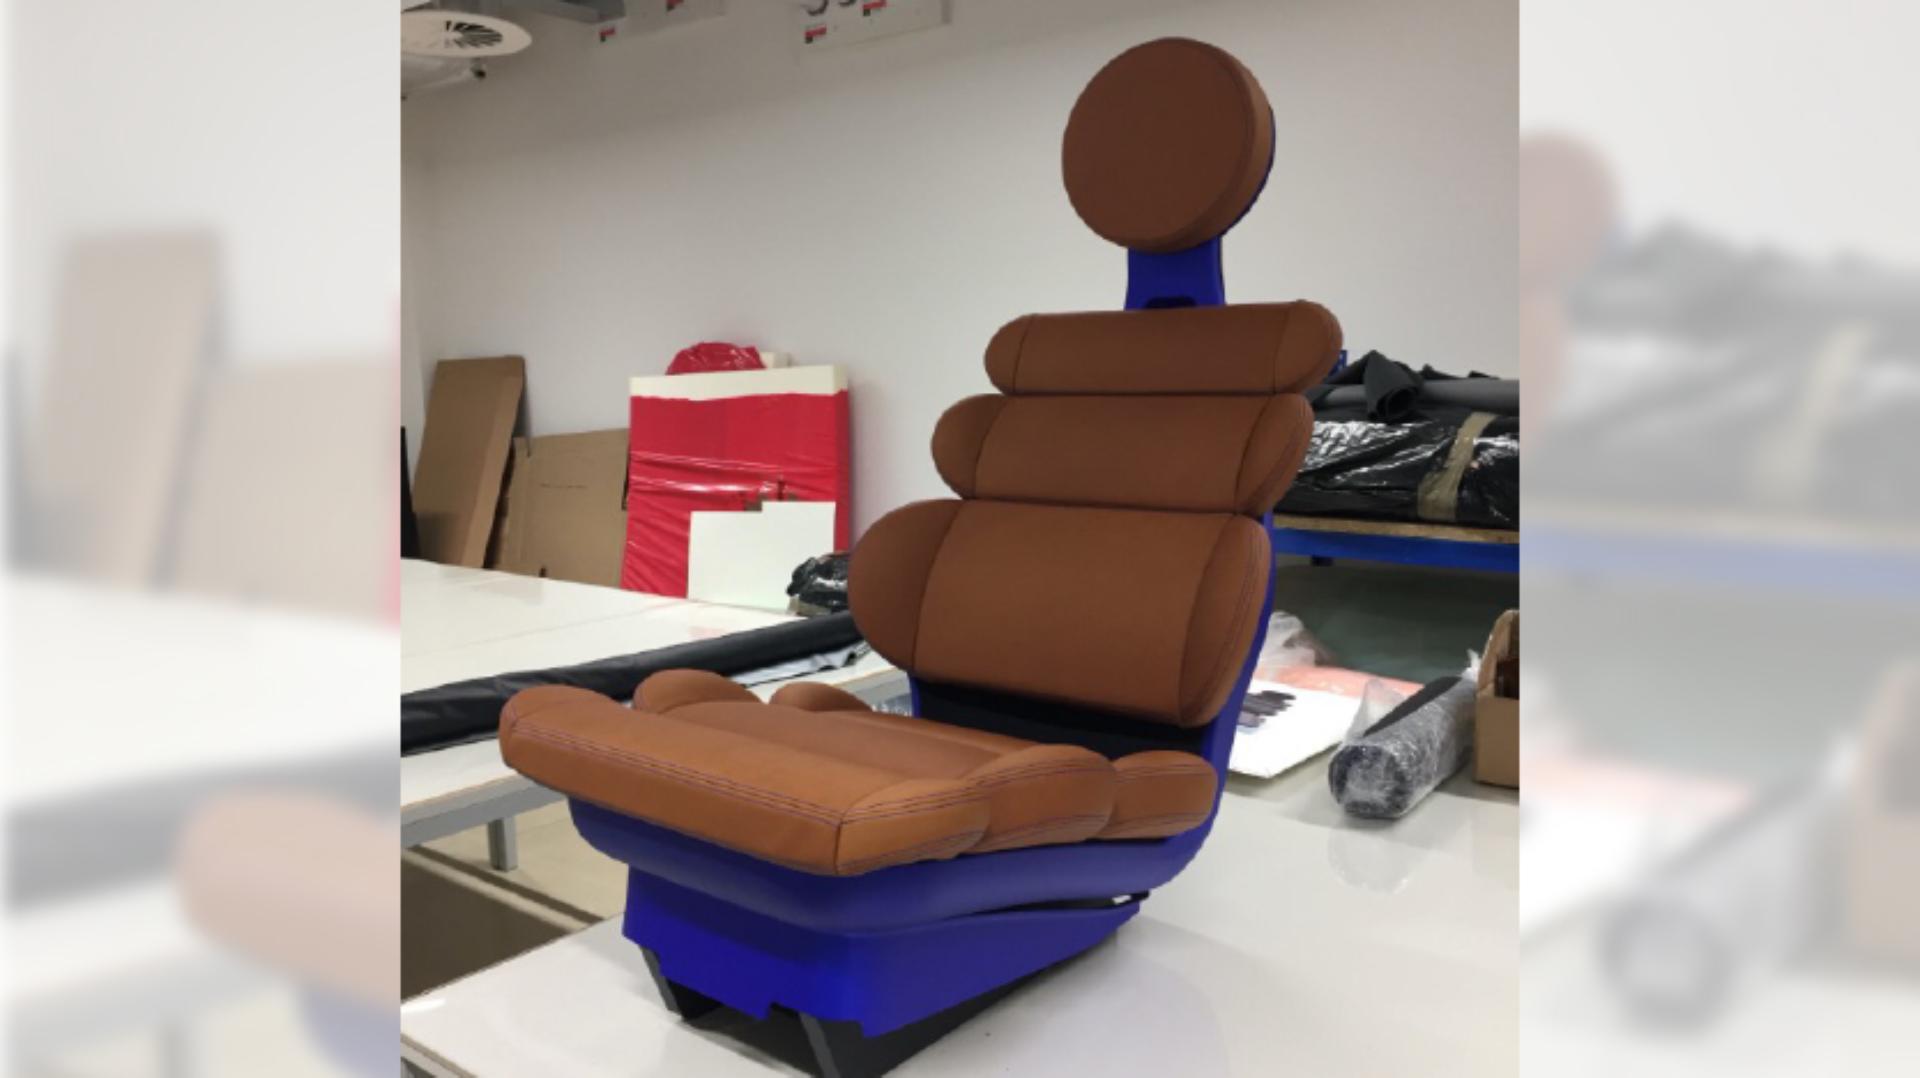 View of the Eames inspired design for the Dyson car seat